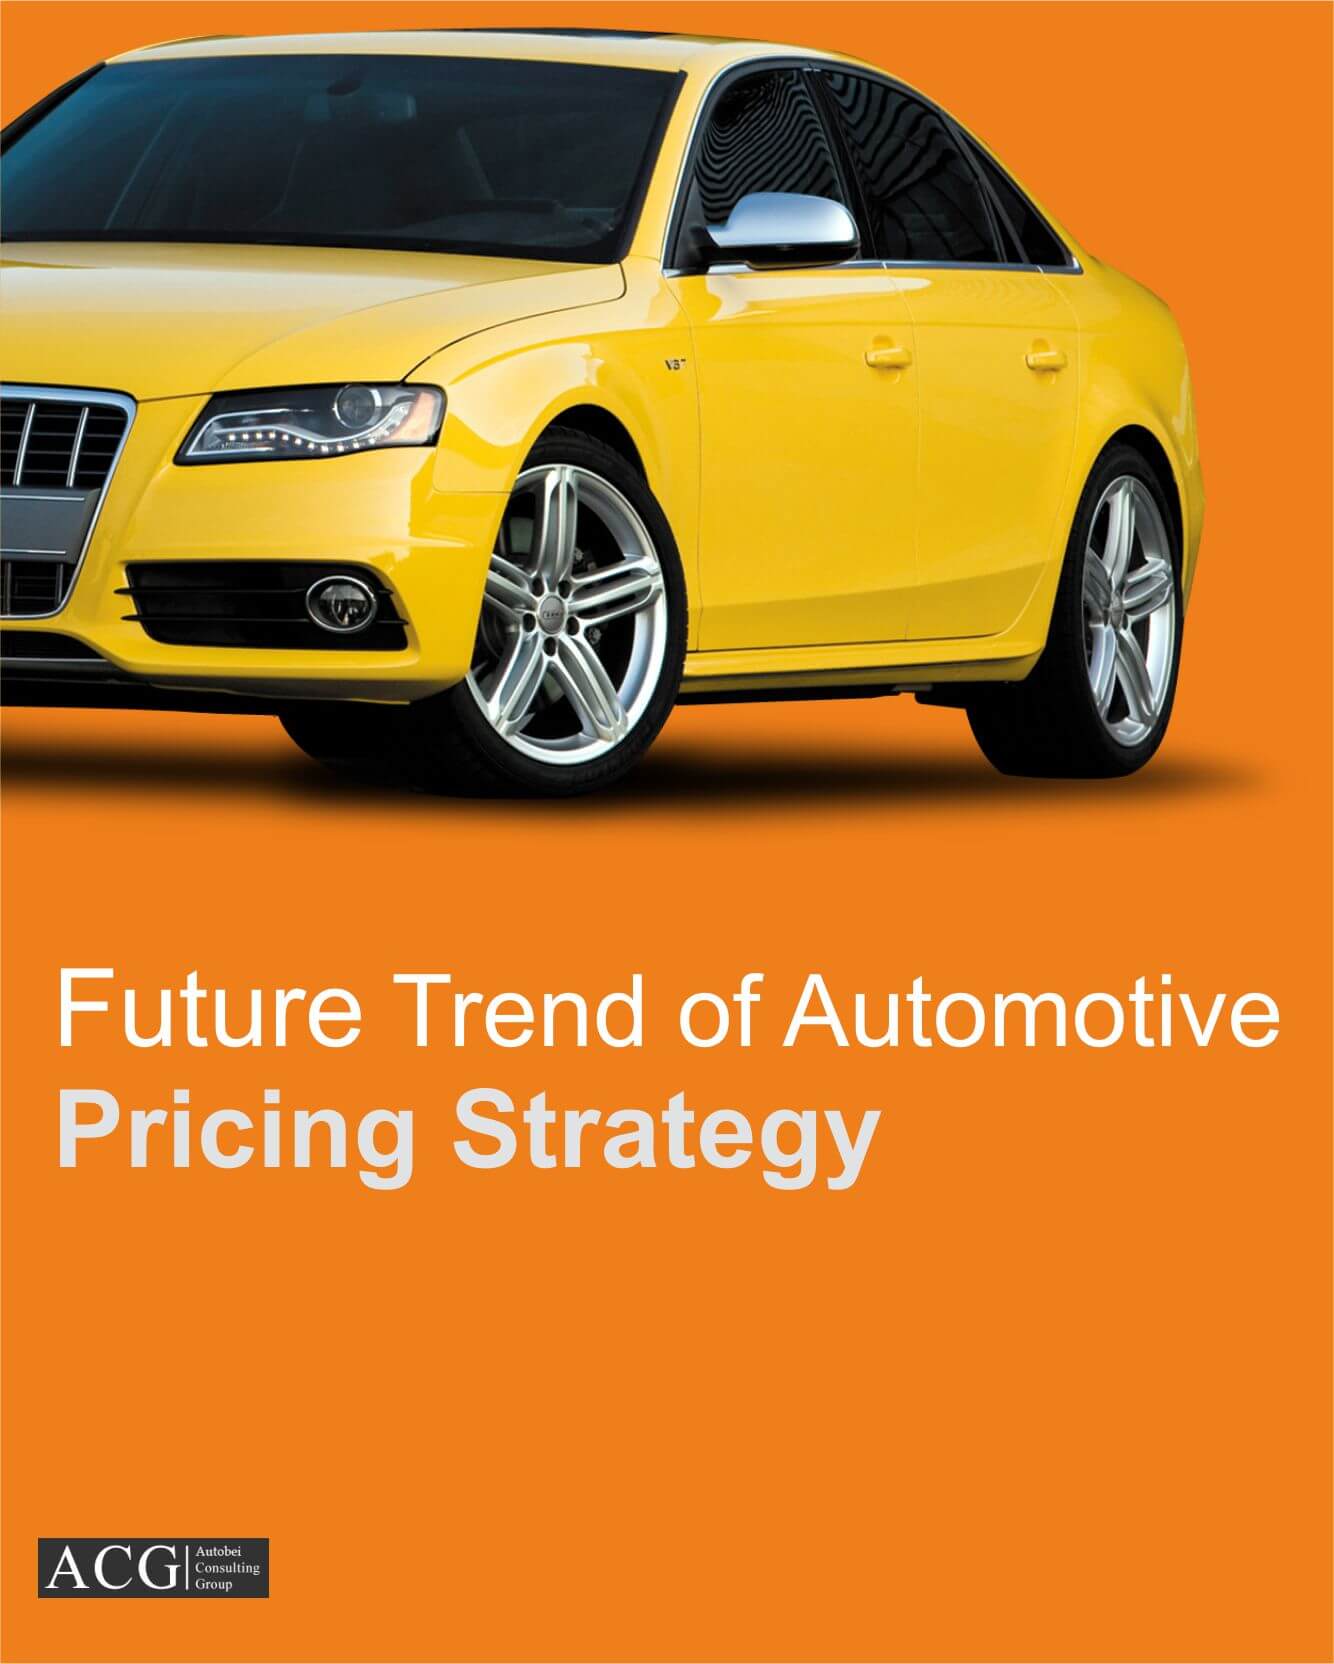 Pricing Strategy for Automobile Industry